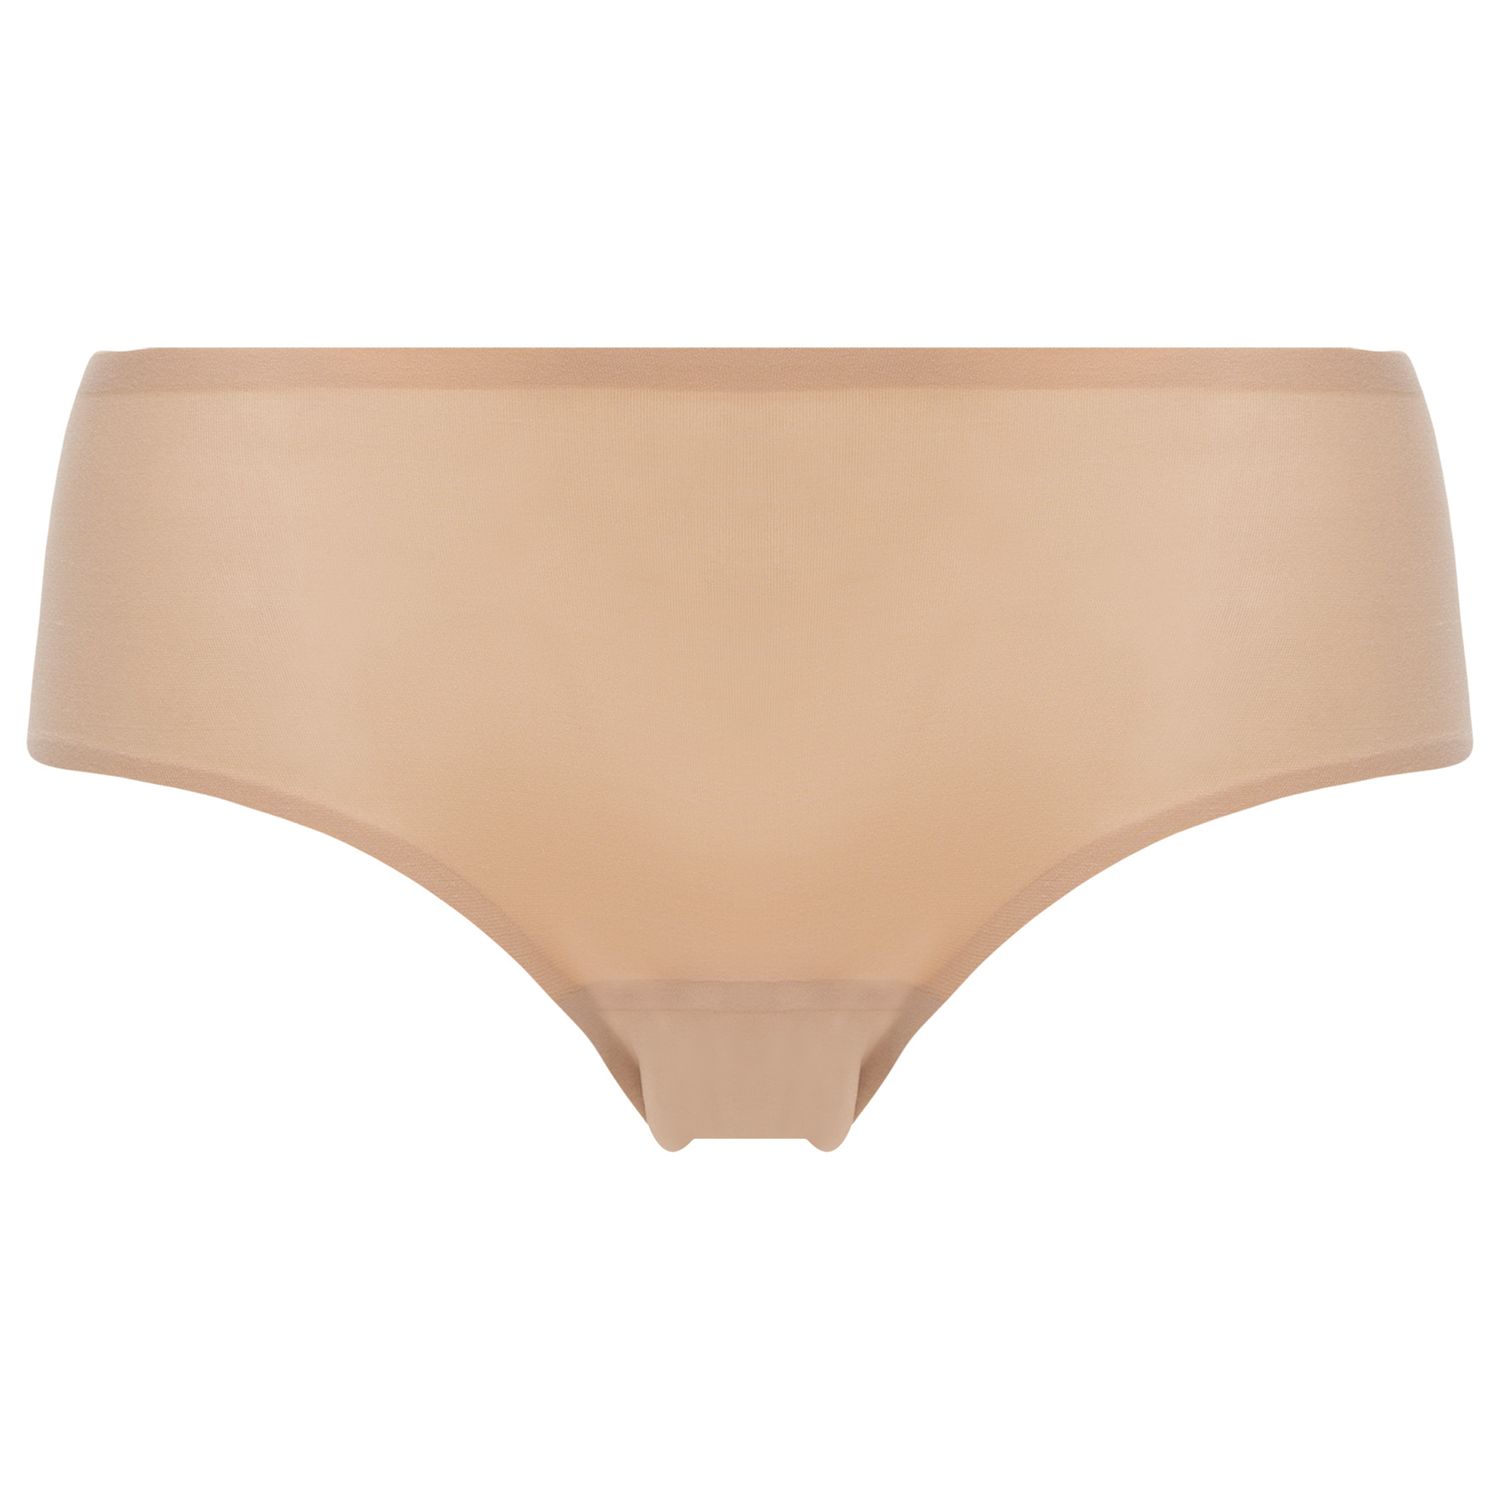 Chantelle Soft Stretch Hipster Knickers, Nude, One Size